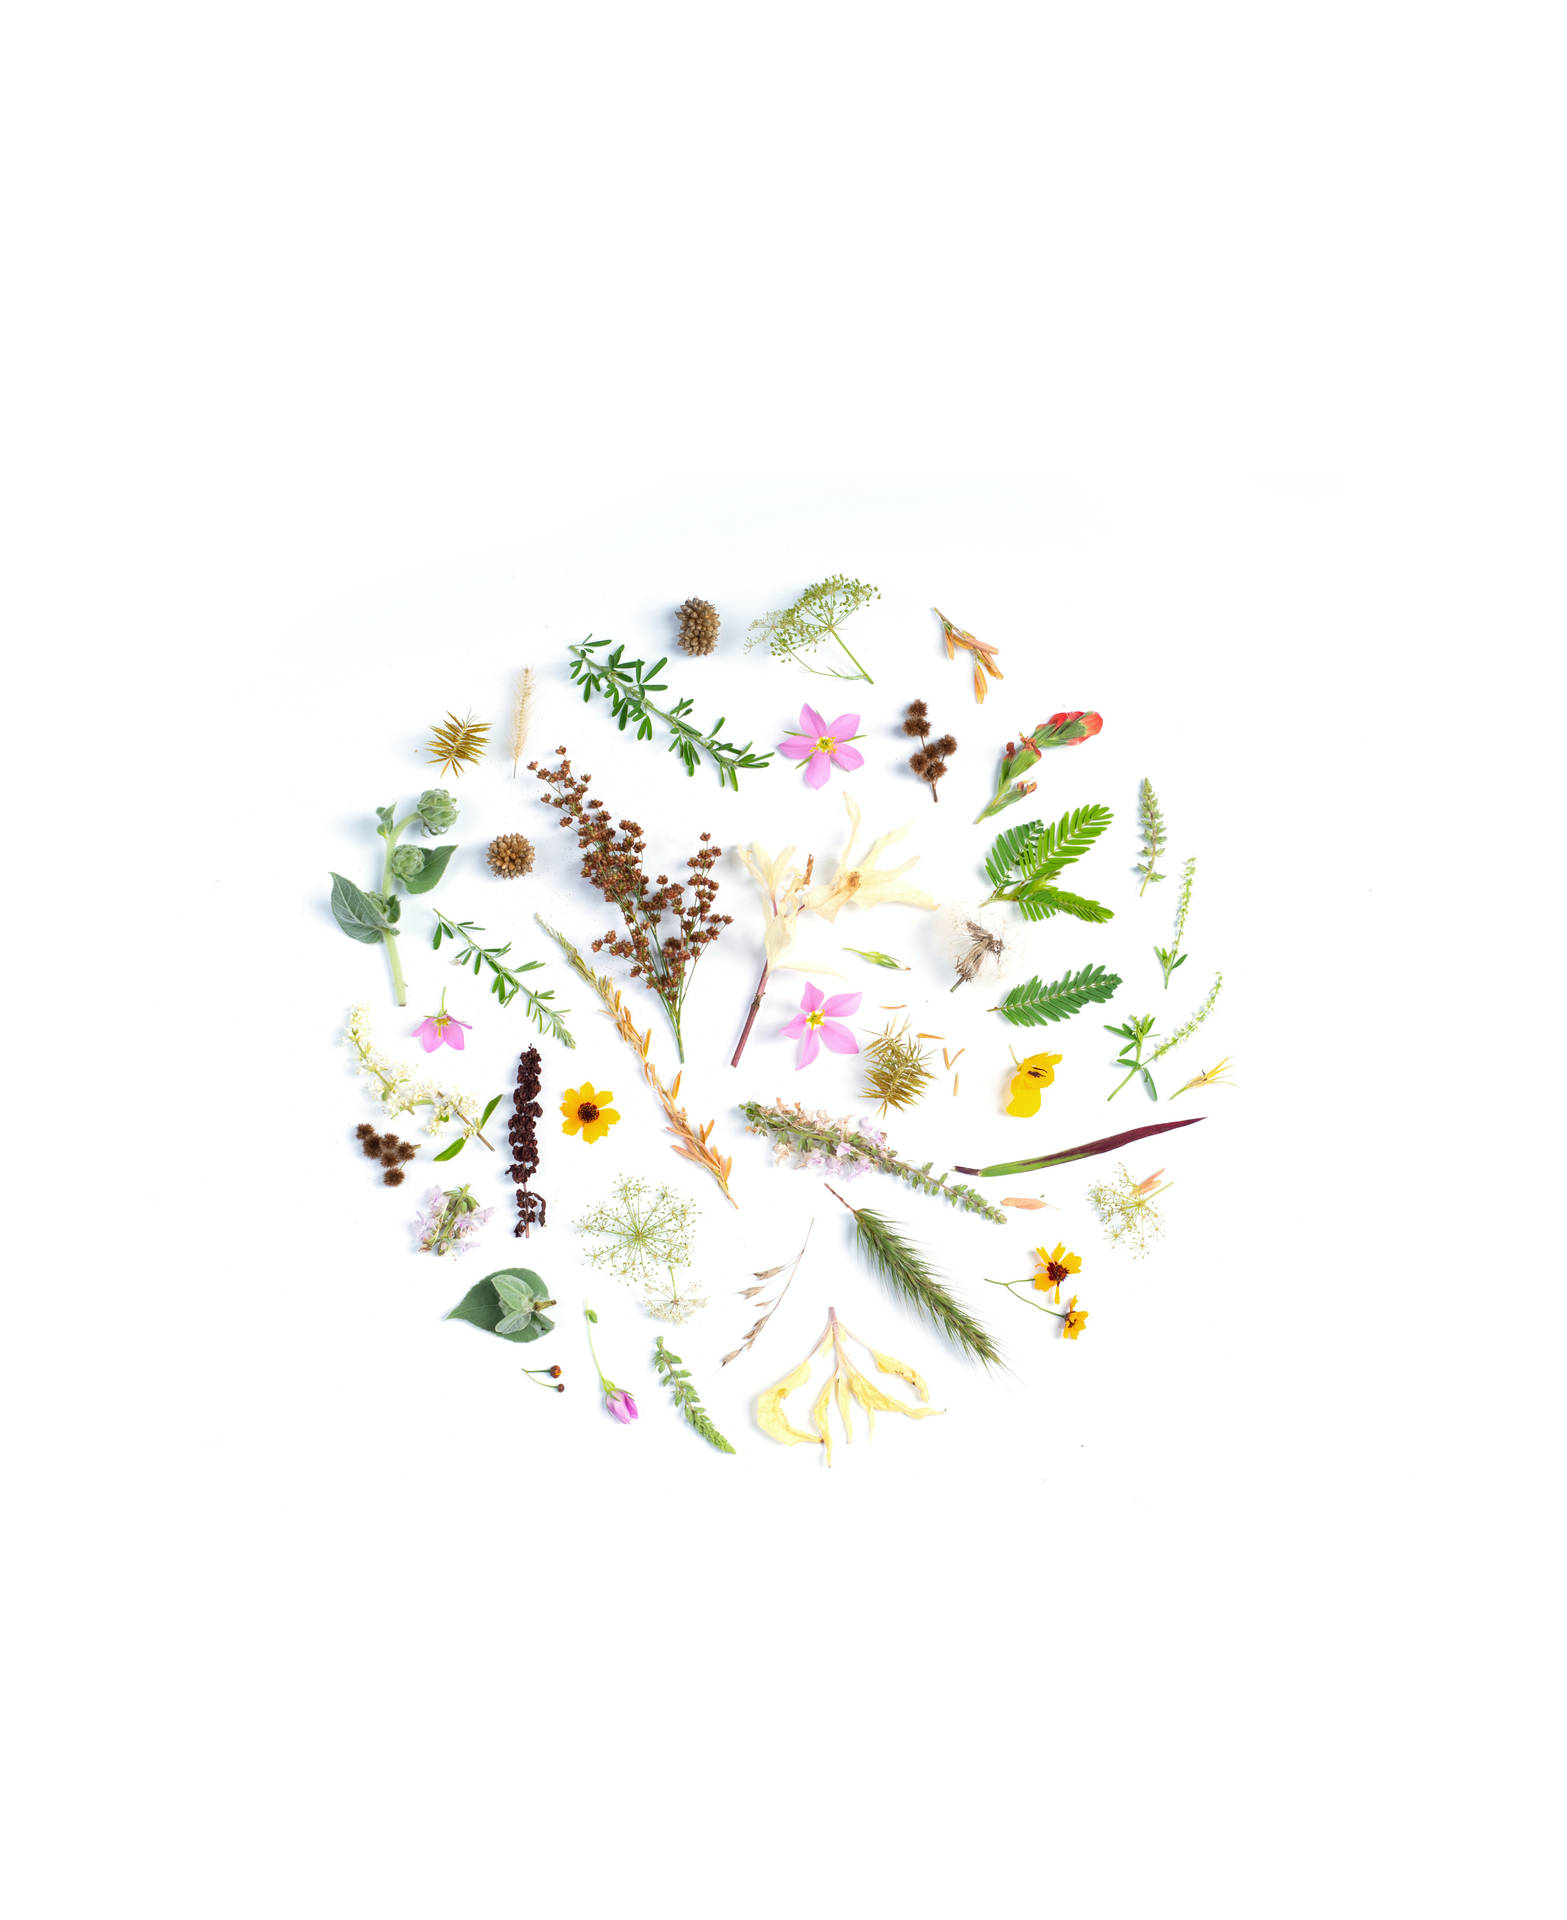 Small Flowers On White Background Background